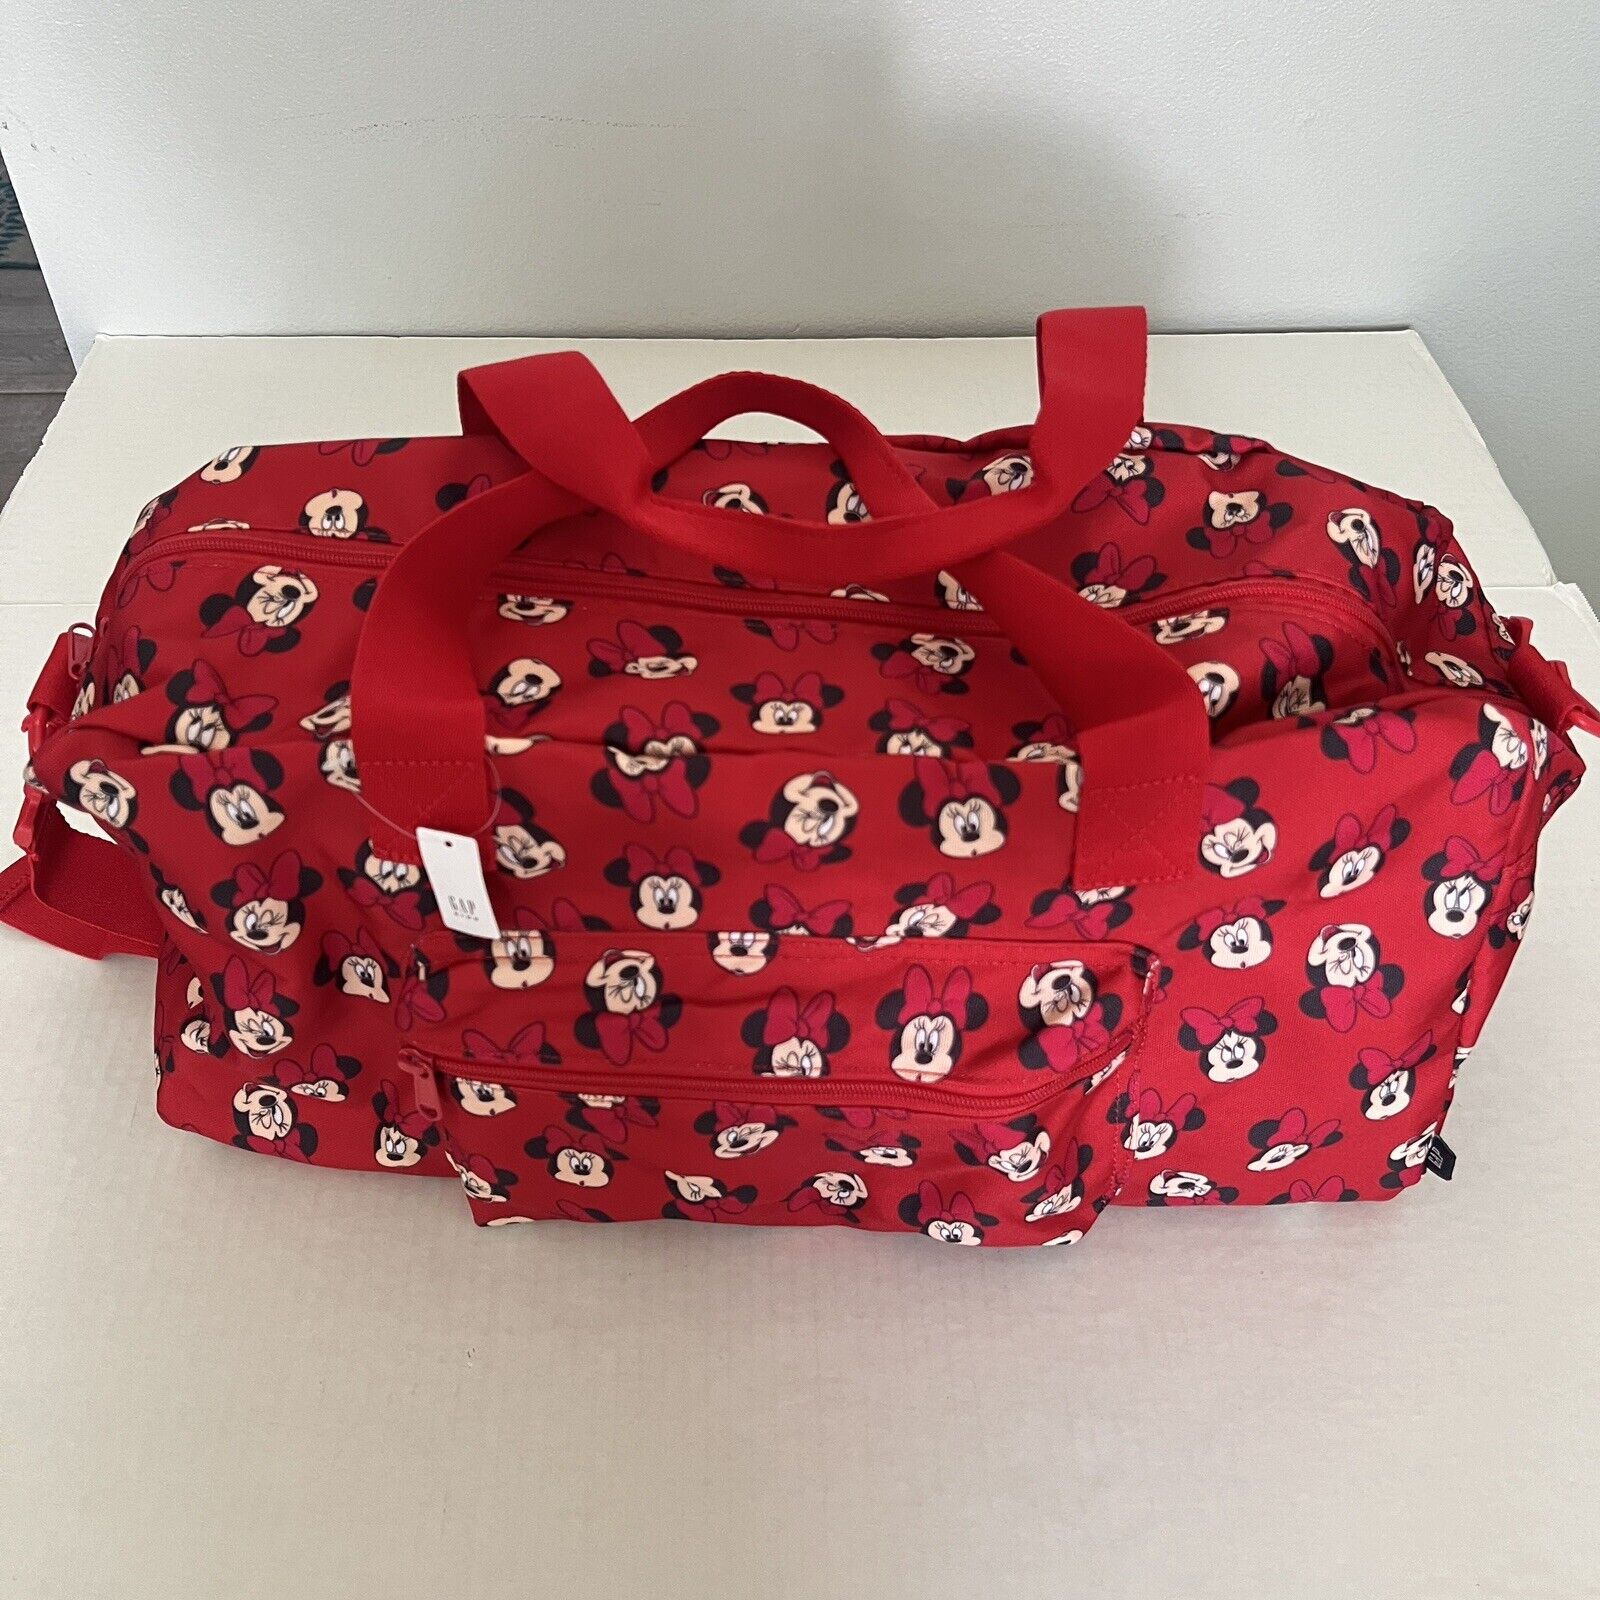 GAP DISNEY Minnie Mouse all over PRINT Red Duffel Weekender Overnight Bag